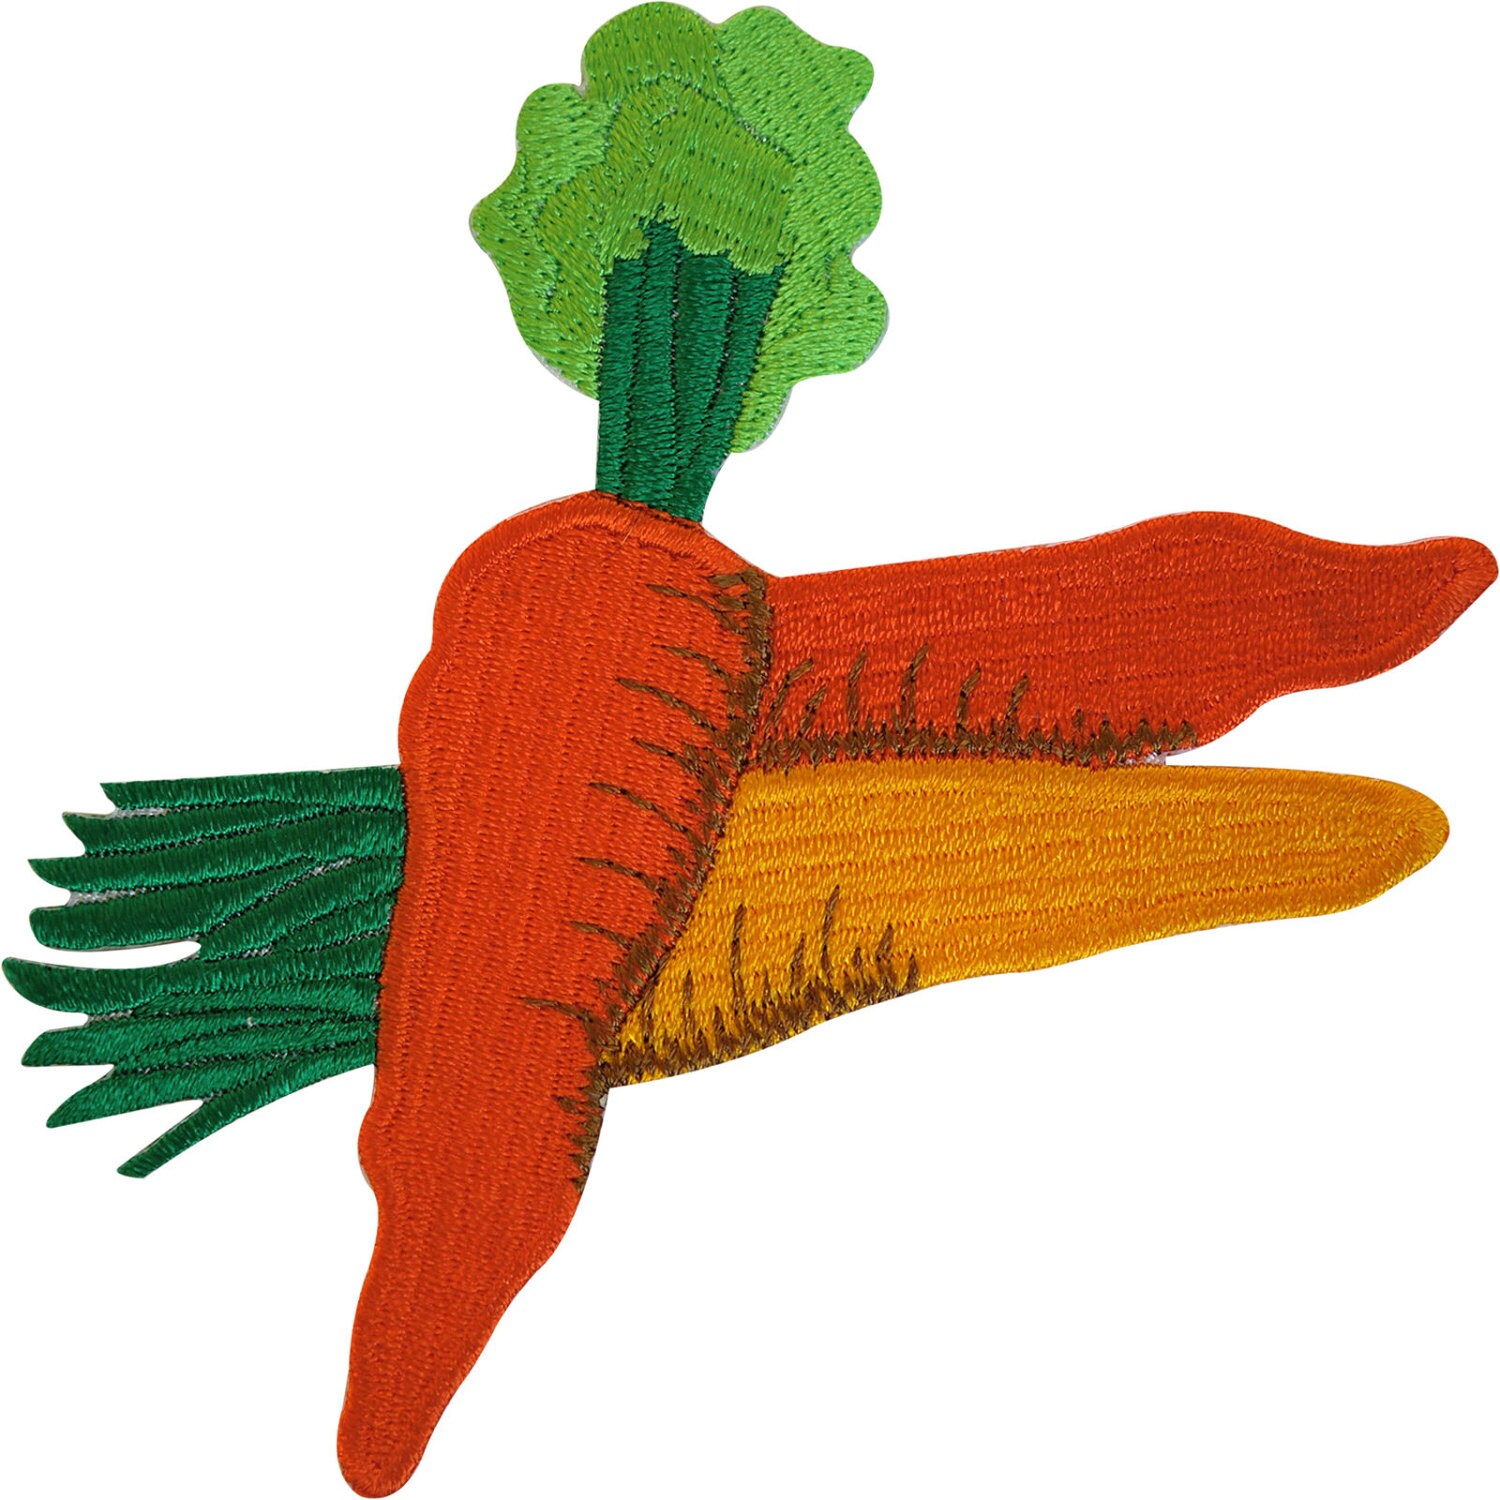 Embroidered Iron On Vegetable Carrot Patch Sew On Badge Clothes Craft Embroidery